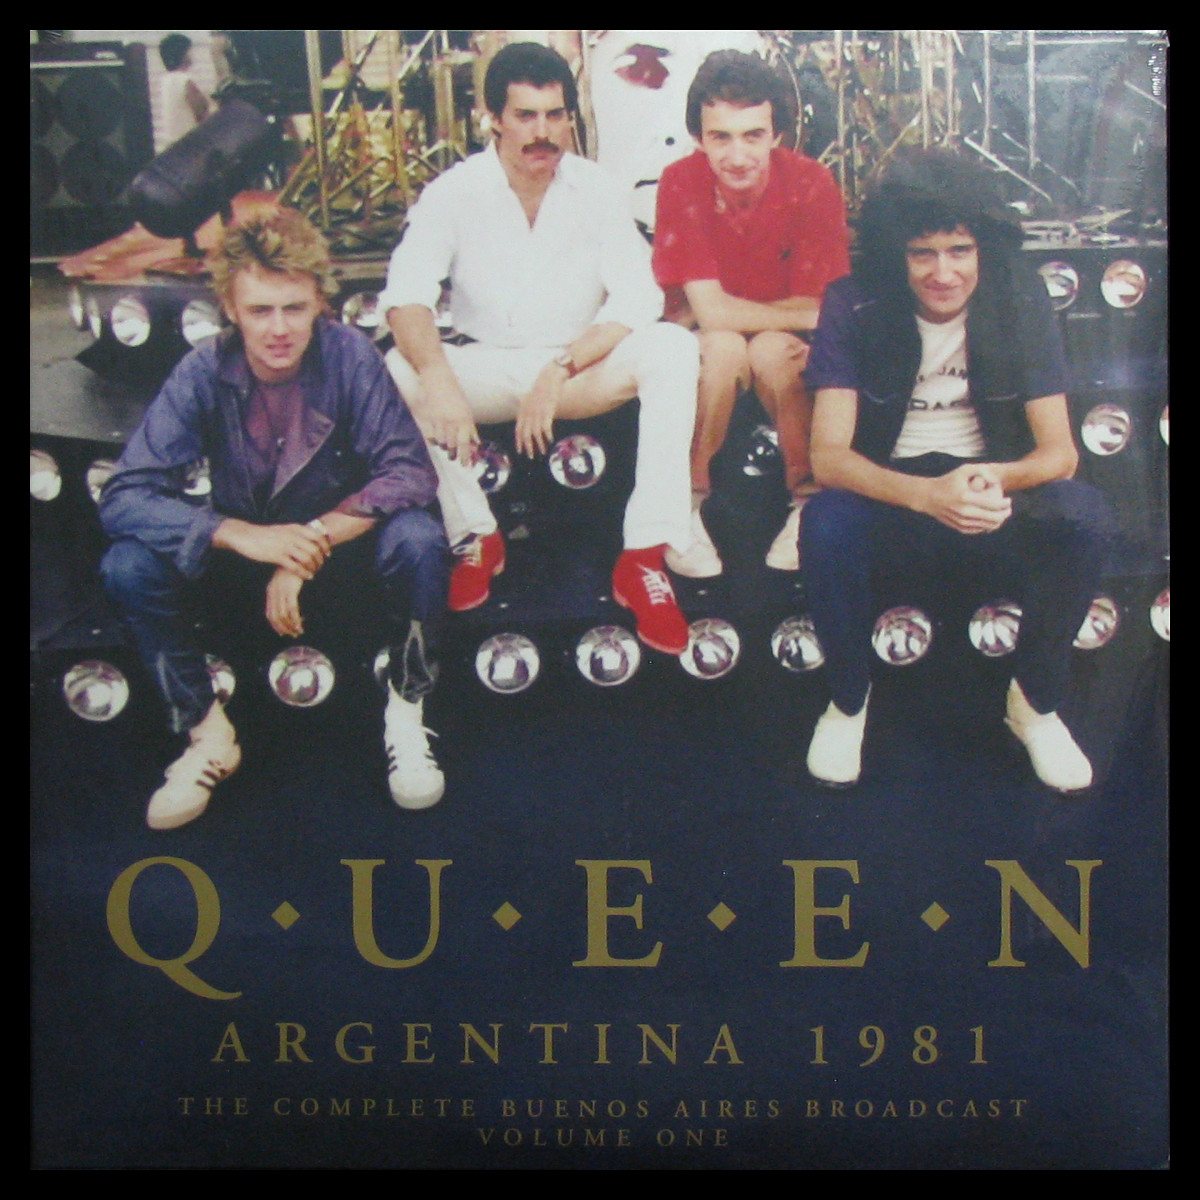 Argentina 1981 The Complete Buenos Aires Broadcast Volume One